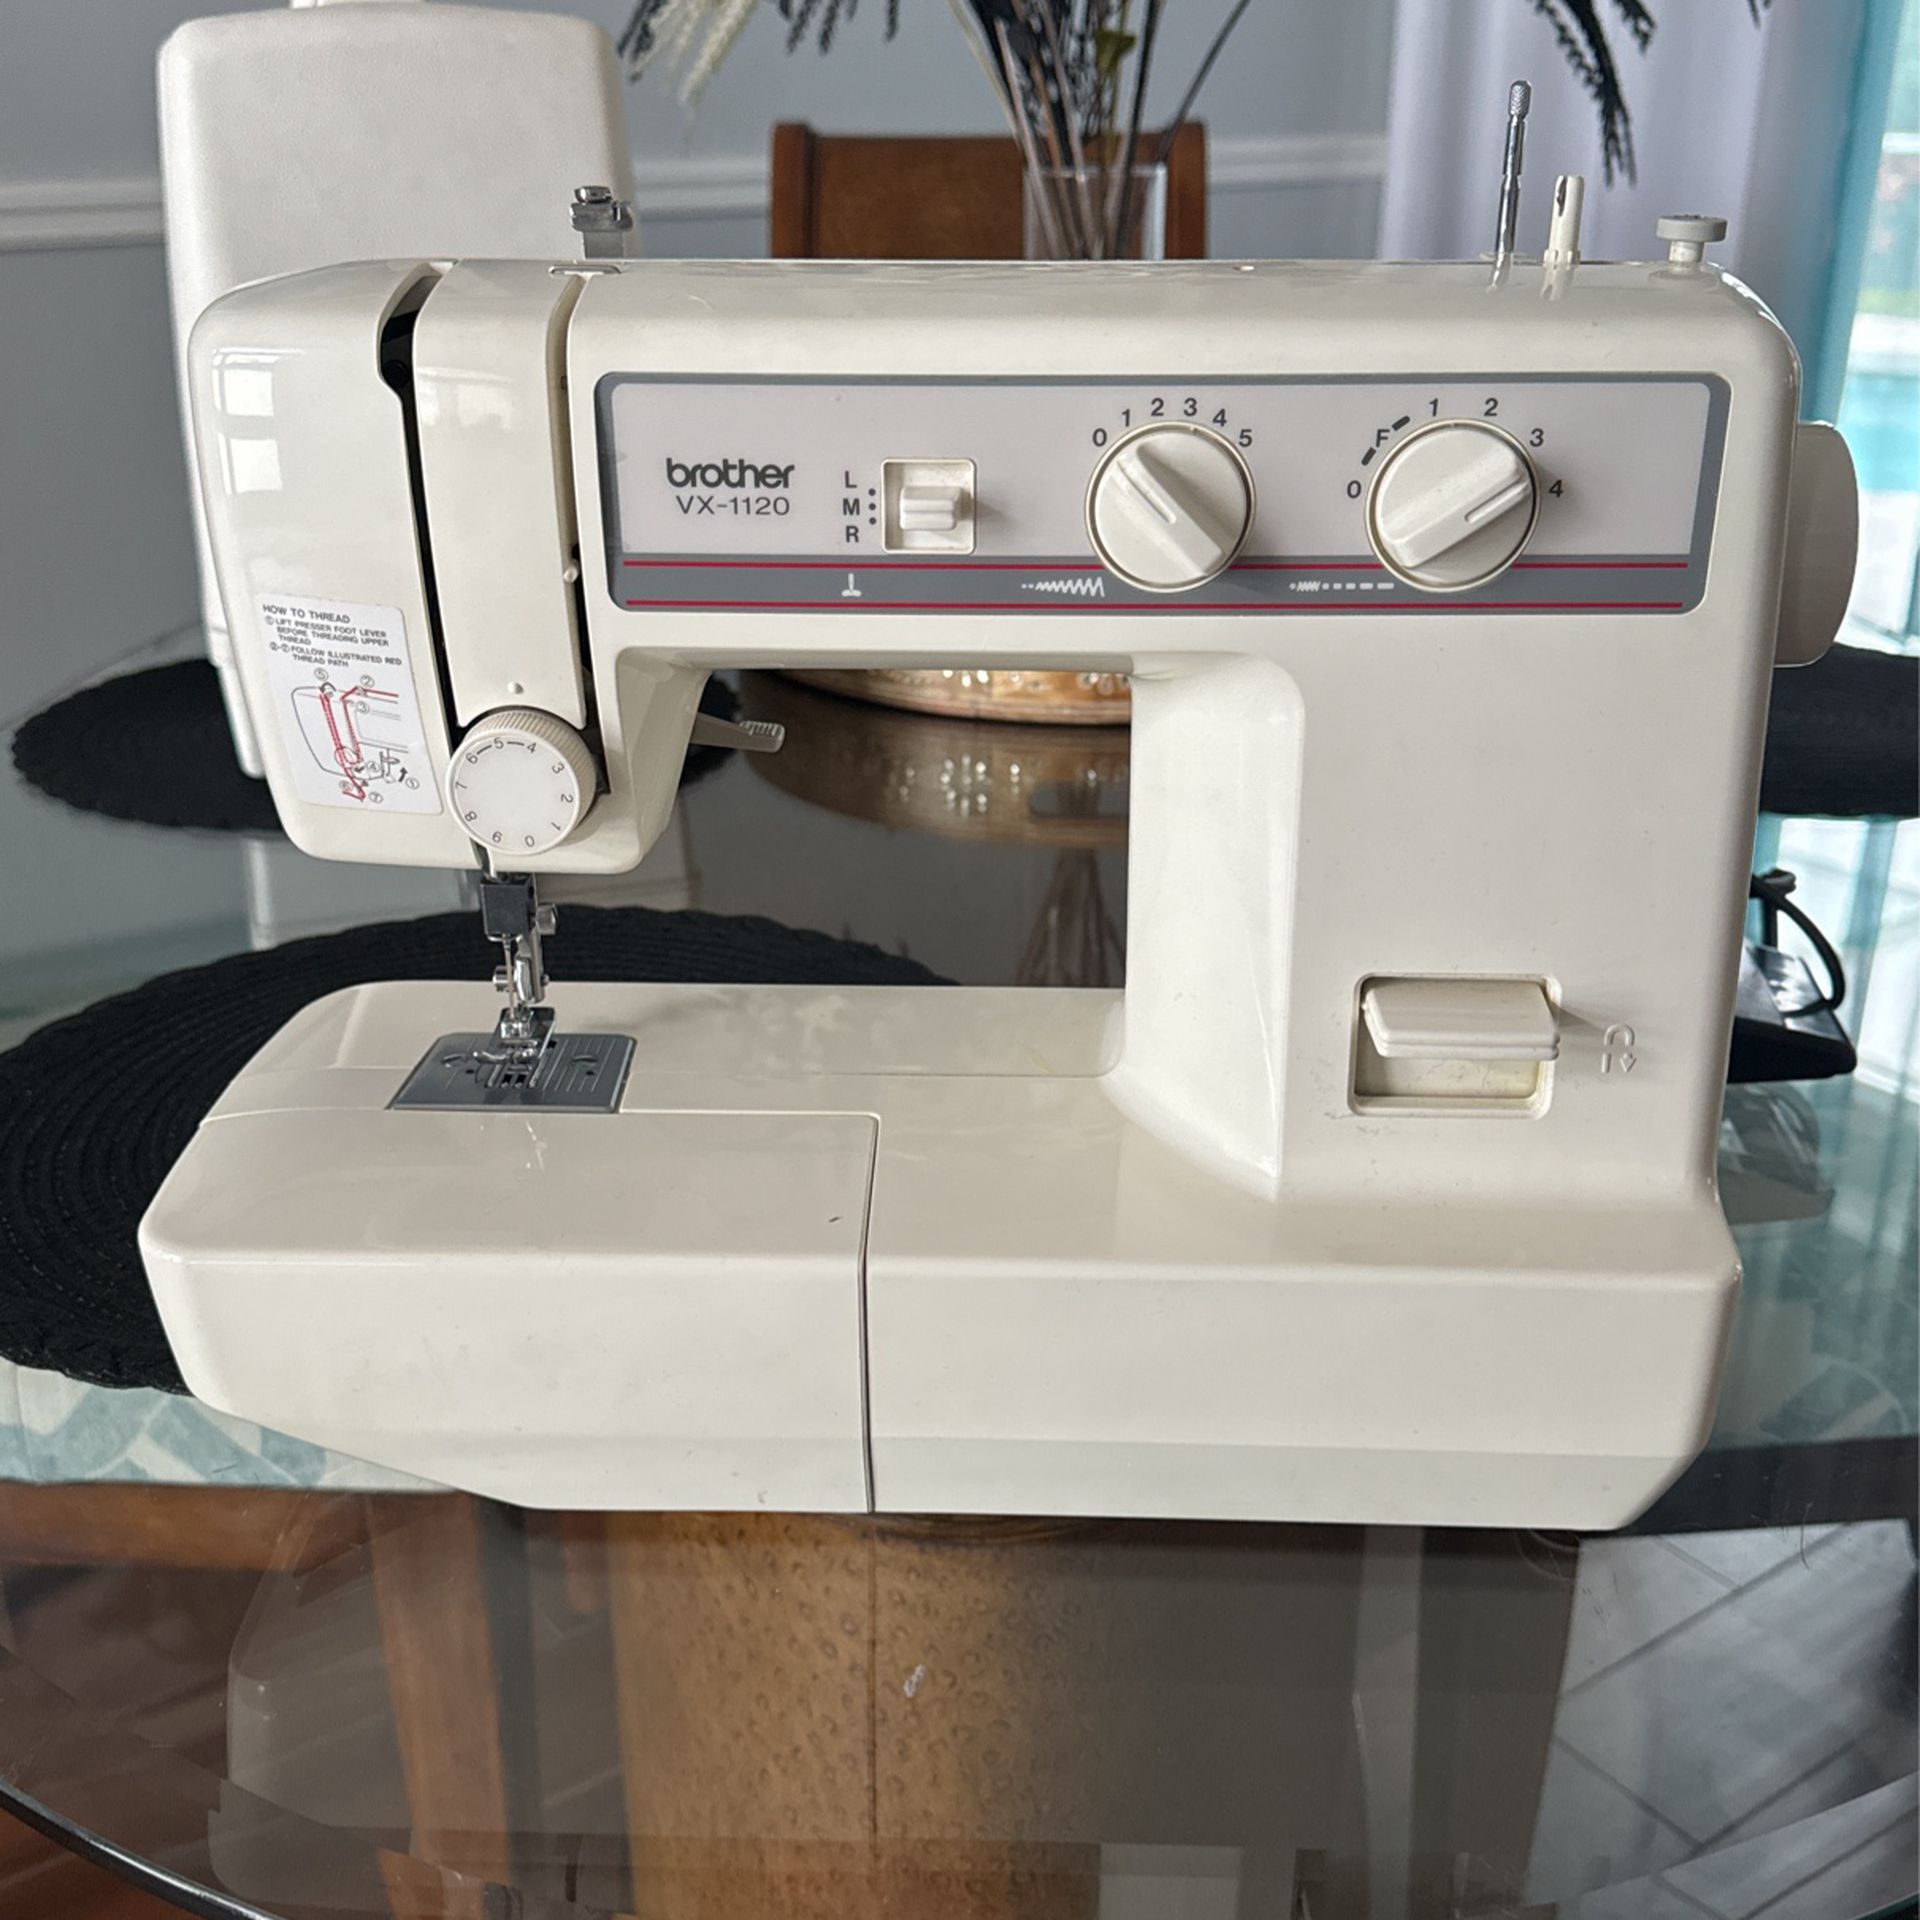 Brother VX-1120 Sewing Machine